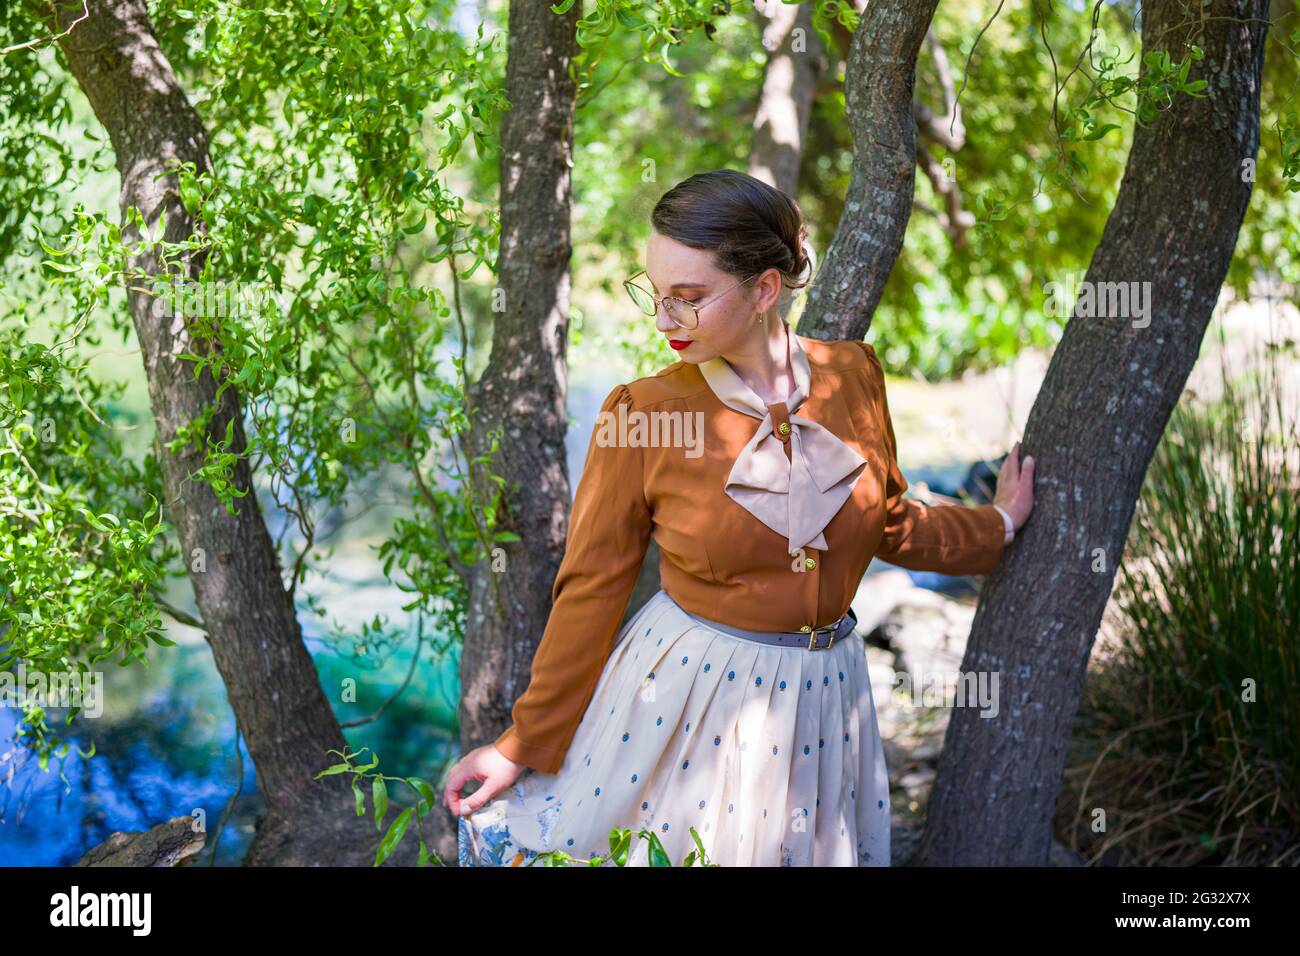 Young Woman in 1940s Fashion in the  Park Stock Photo